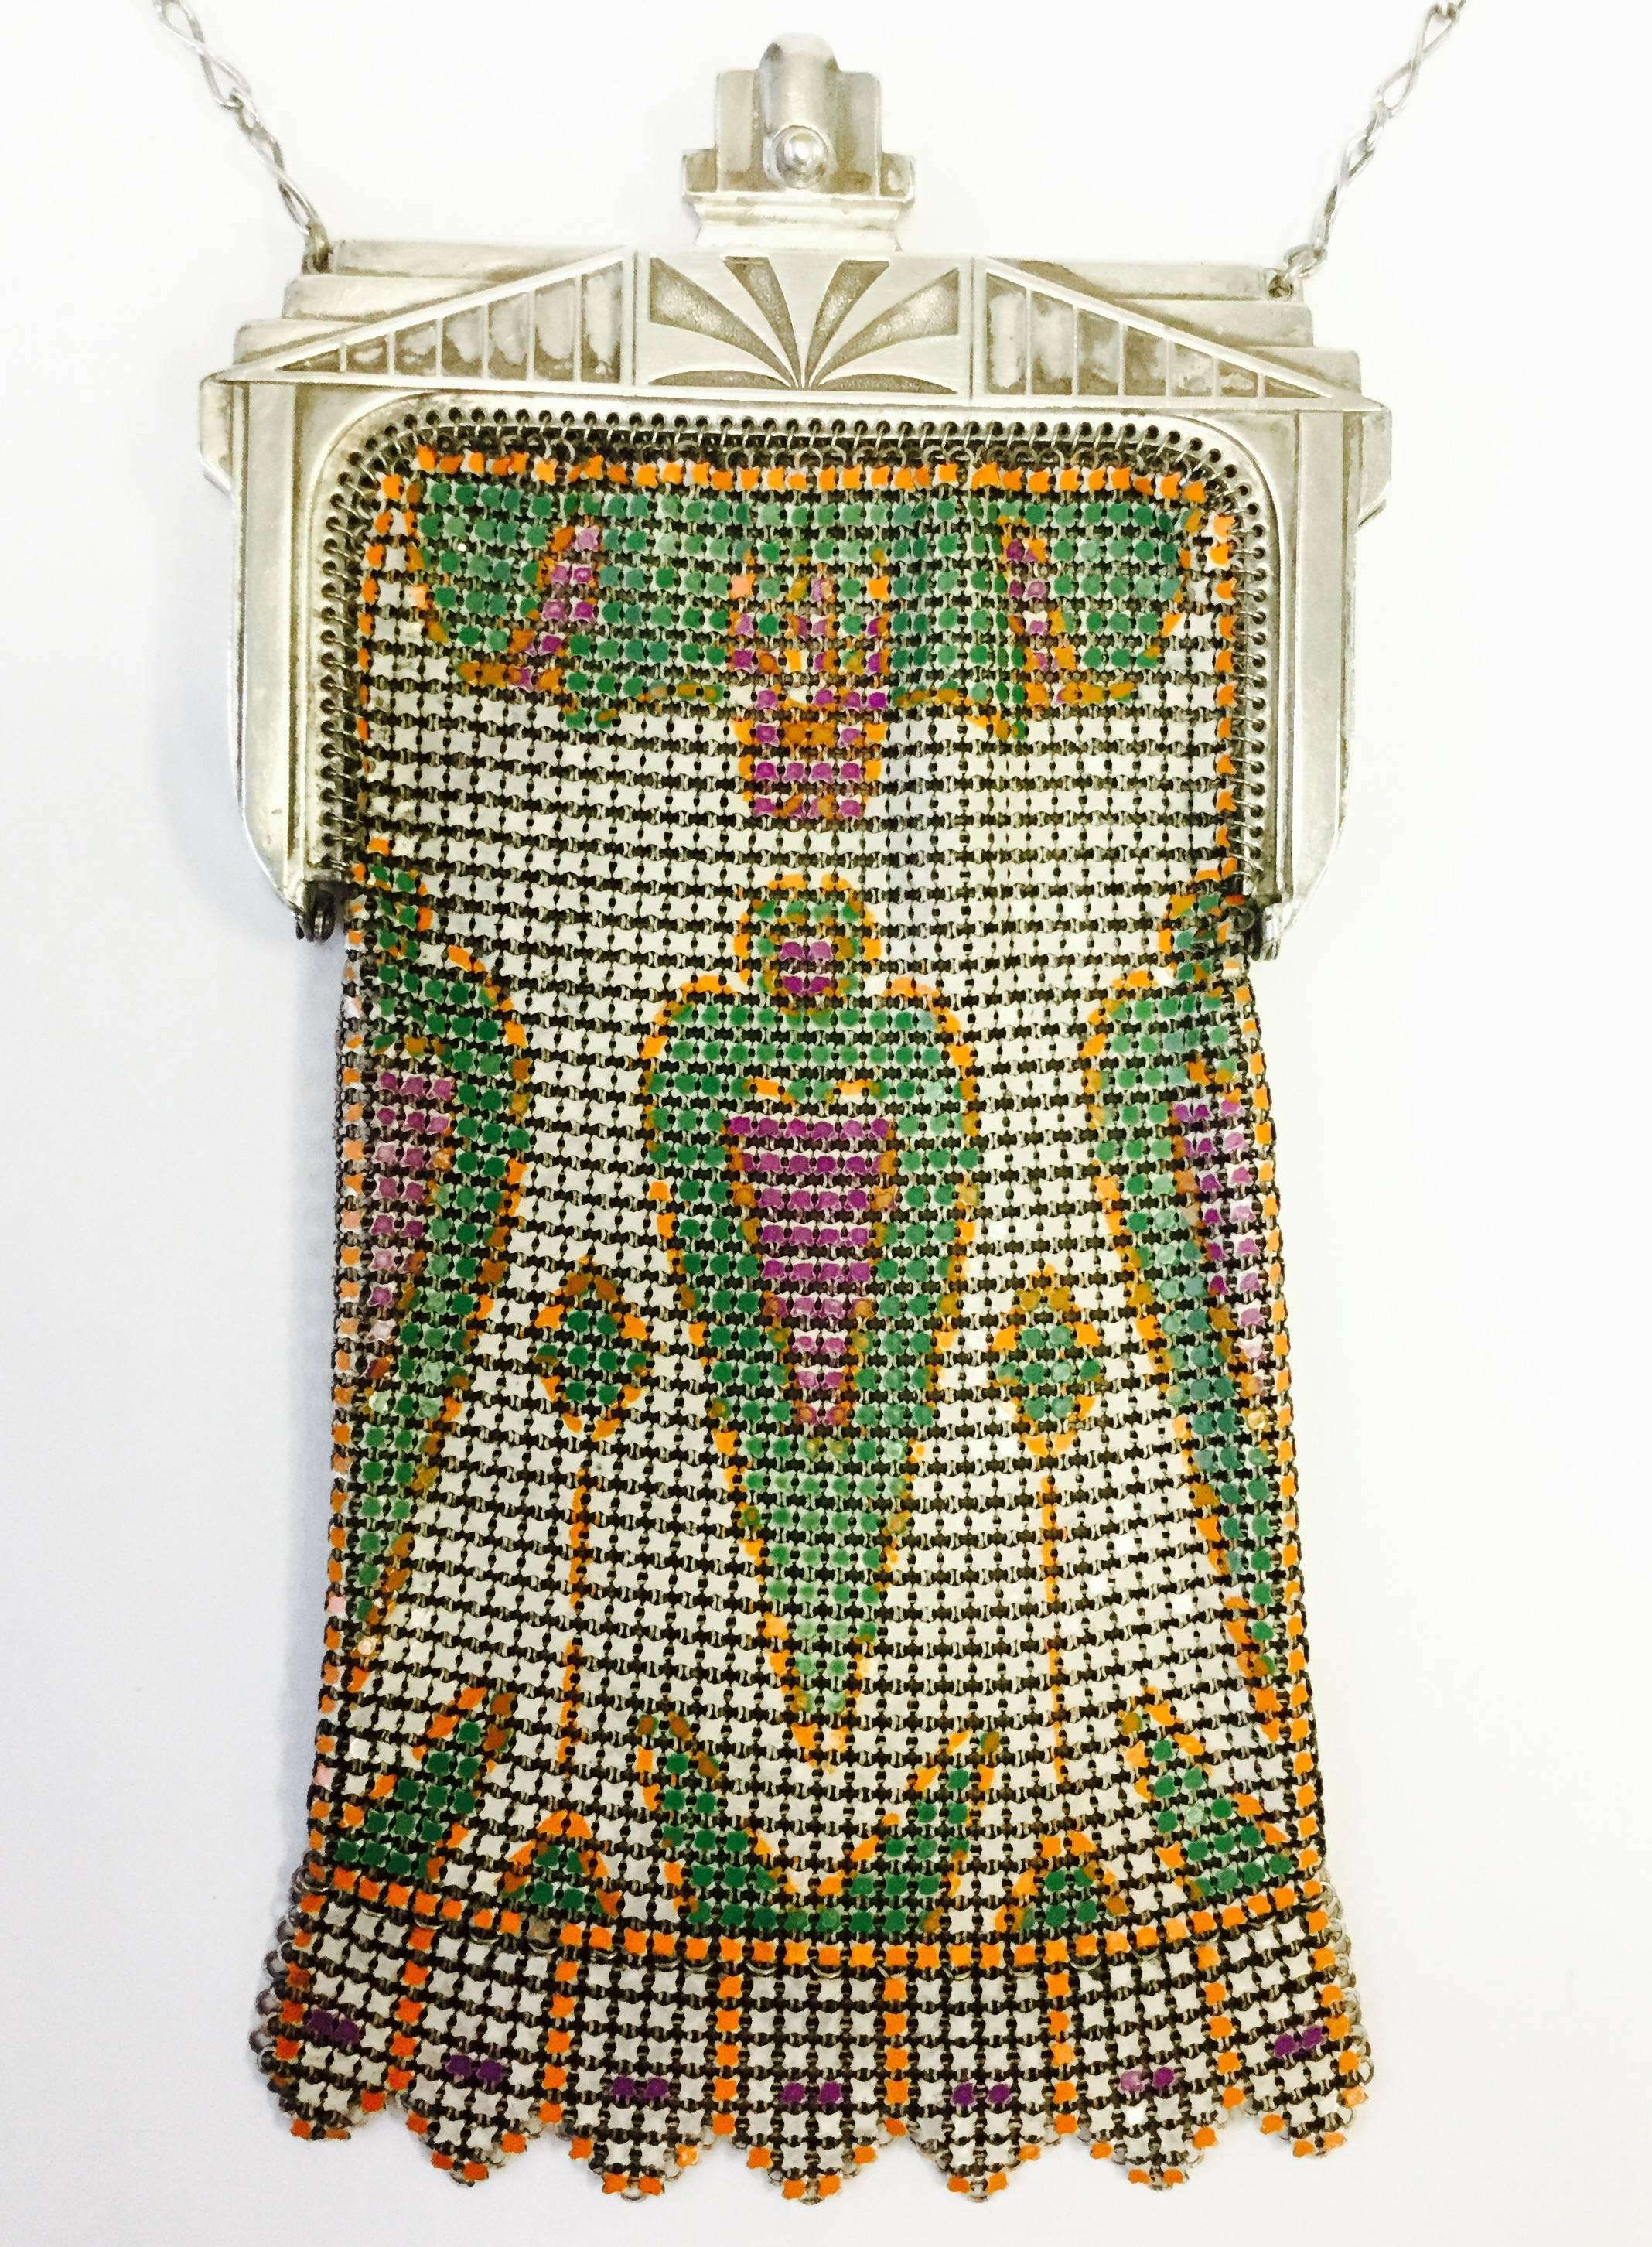 
Fantastic 1920s mesh evening purse! This chainmail purse has a pressed metal art deco closure with a sunburst design, and the body features a wonderfully preserved enamel print. The symmetrical peach pink, parrot green, and tangerine orange